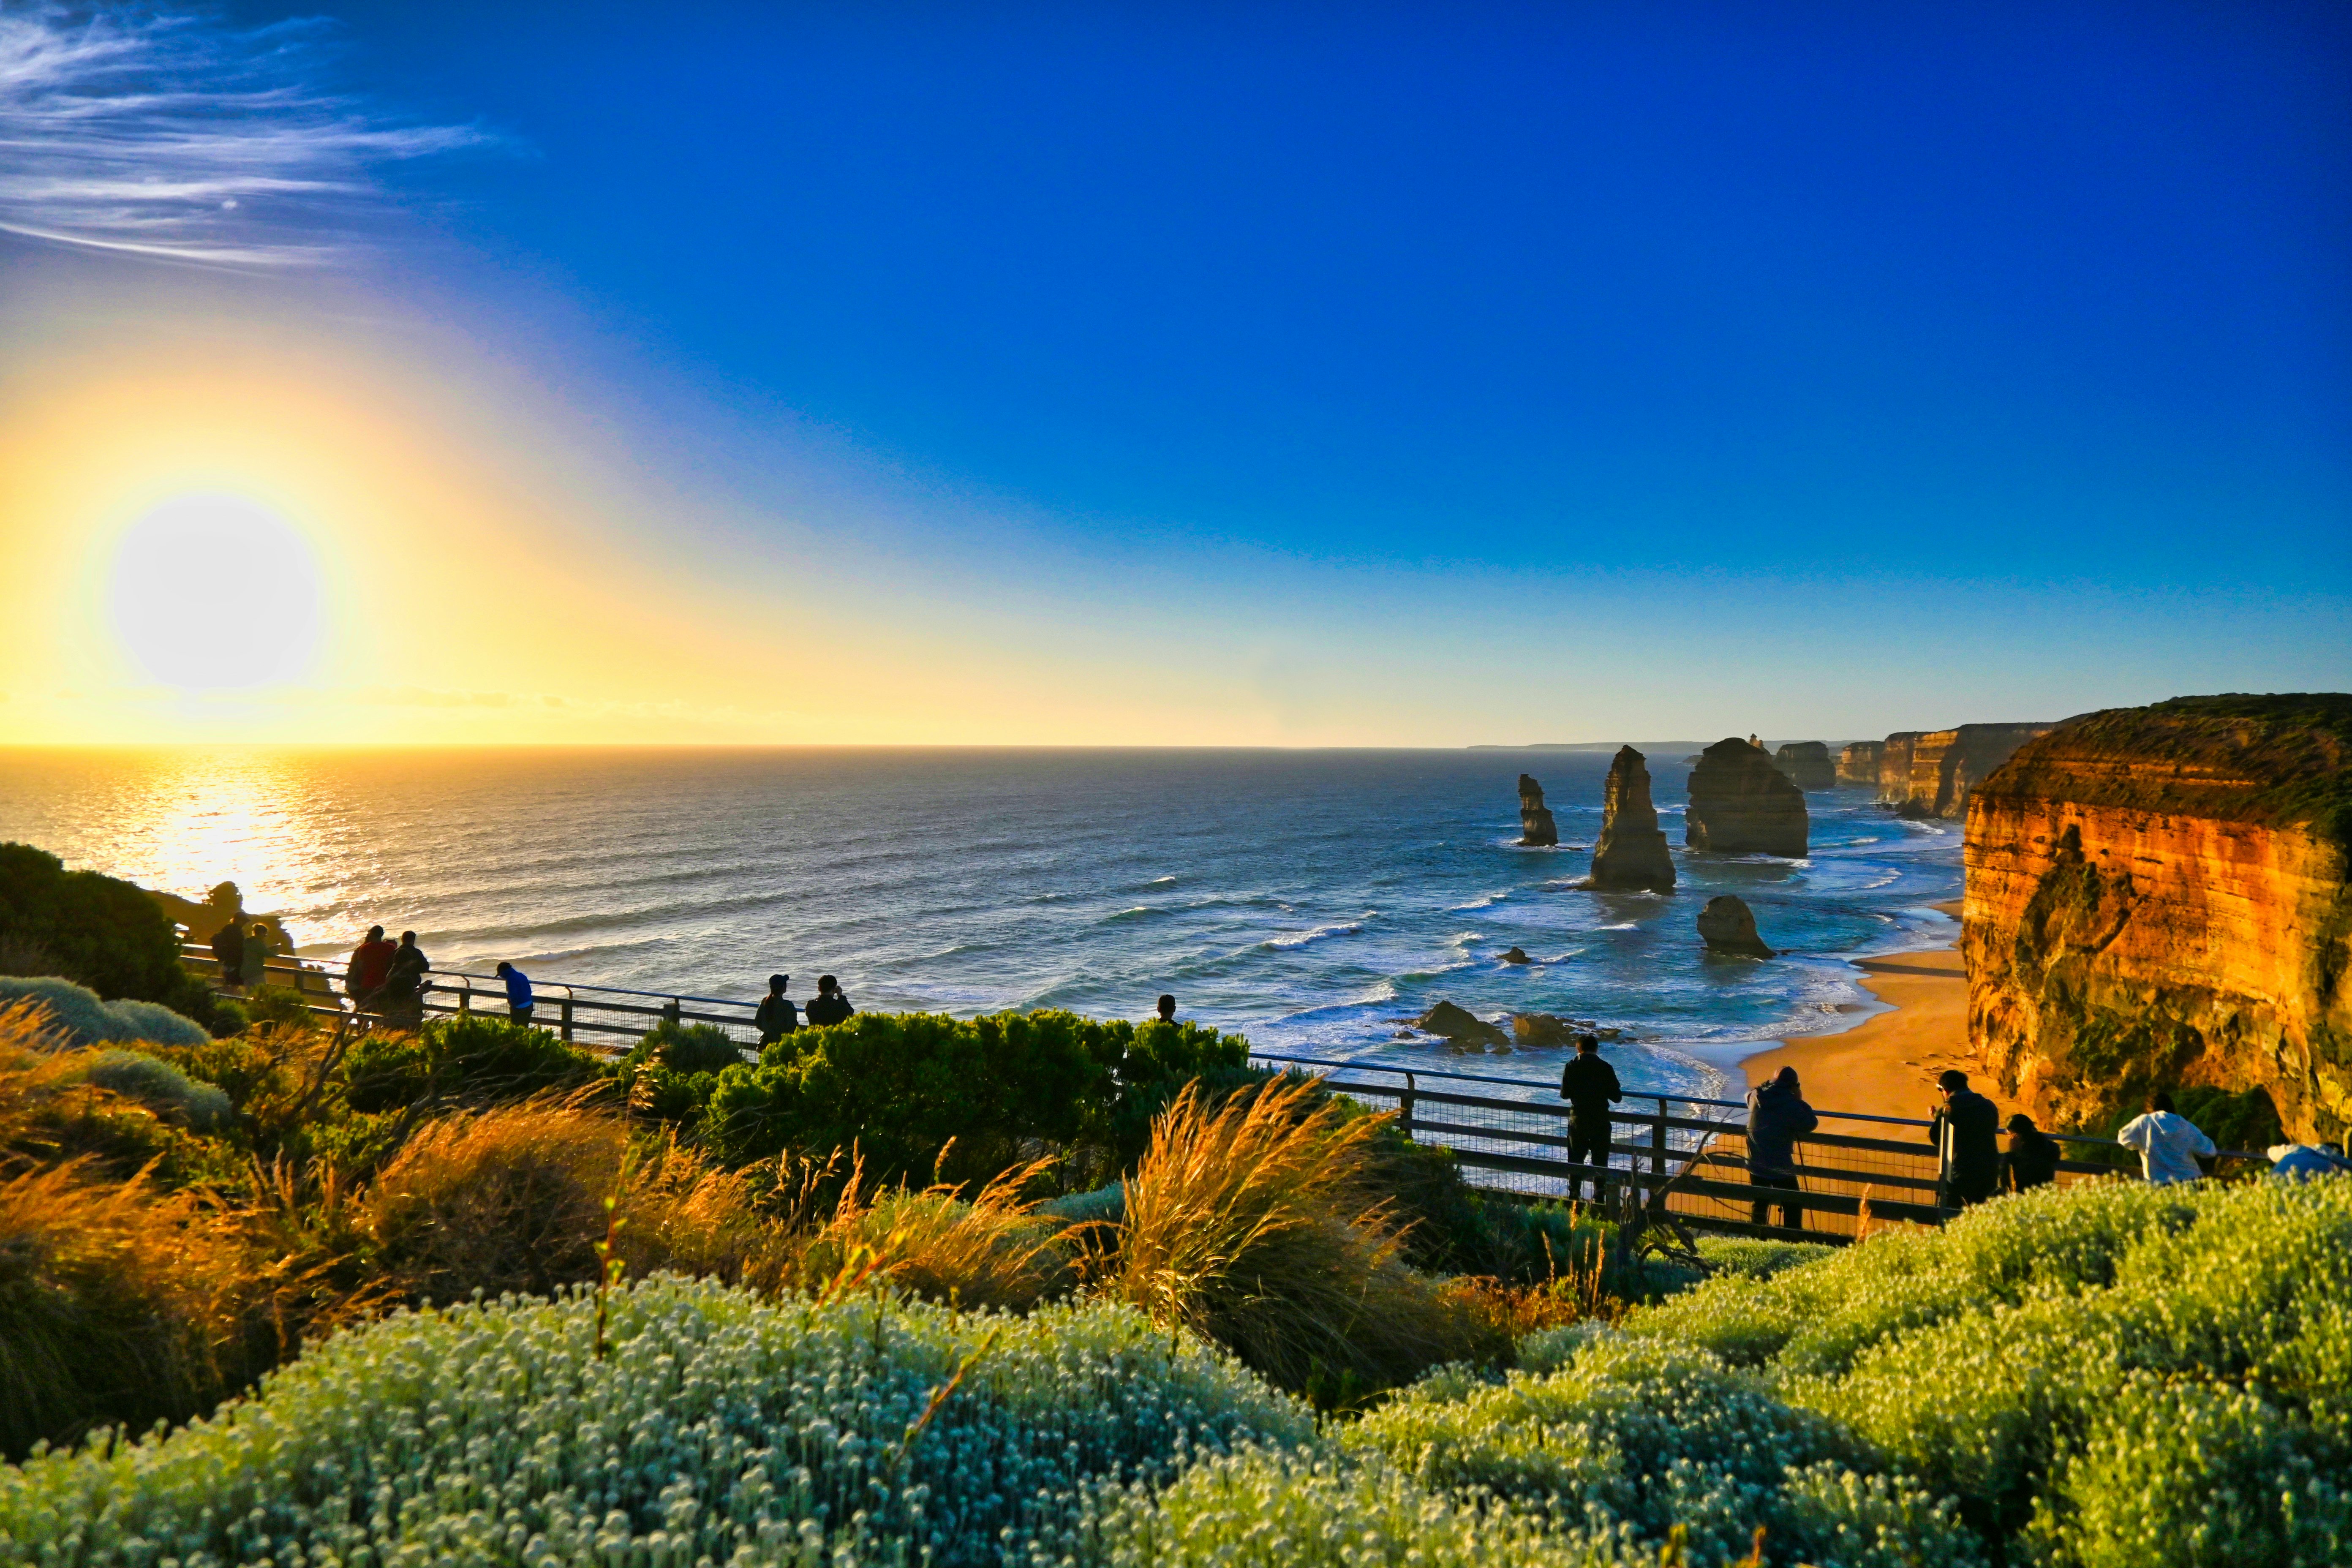 Magical sunset colours over the 12 Apostles, the second most visited tourist site in Victoria